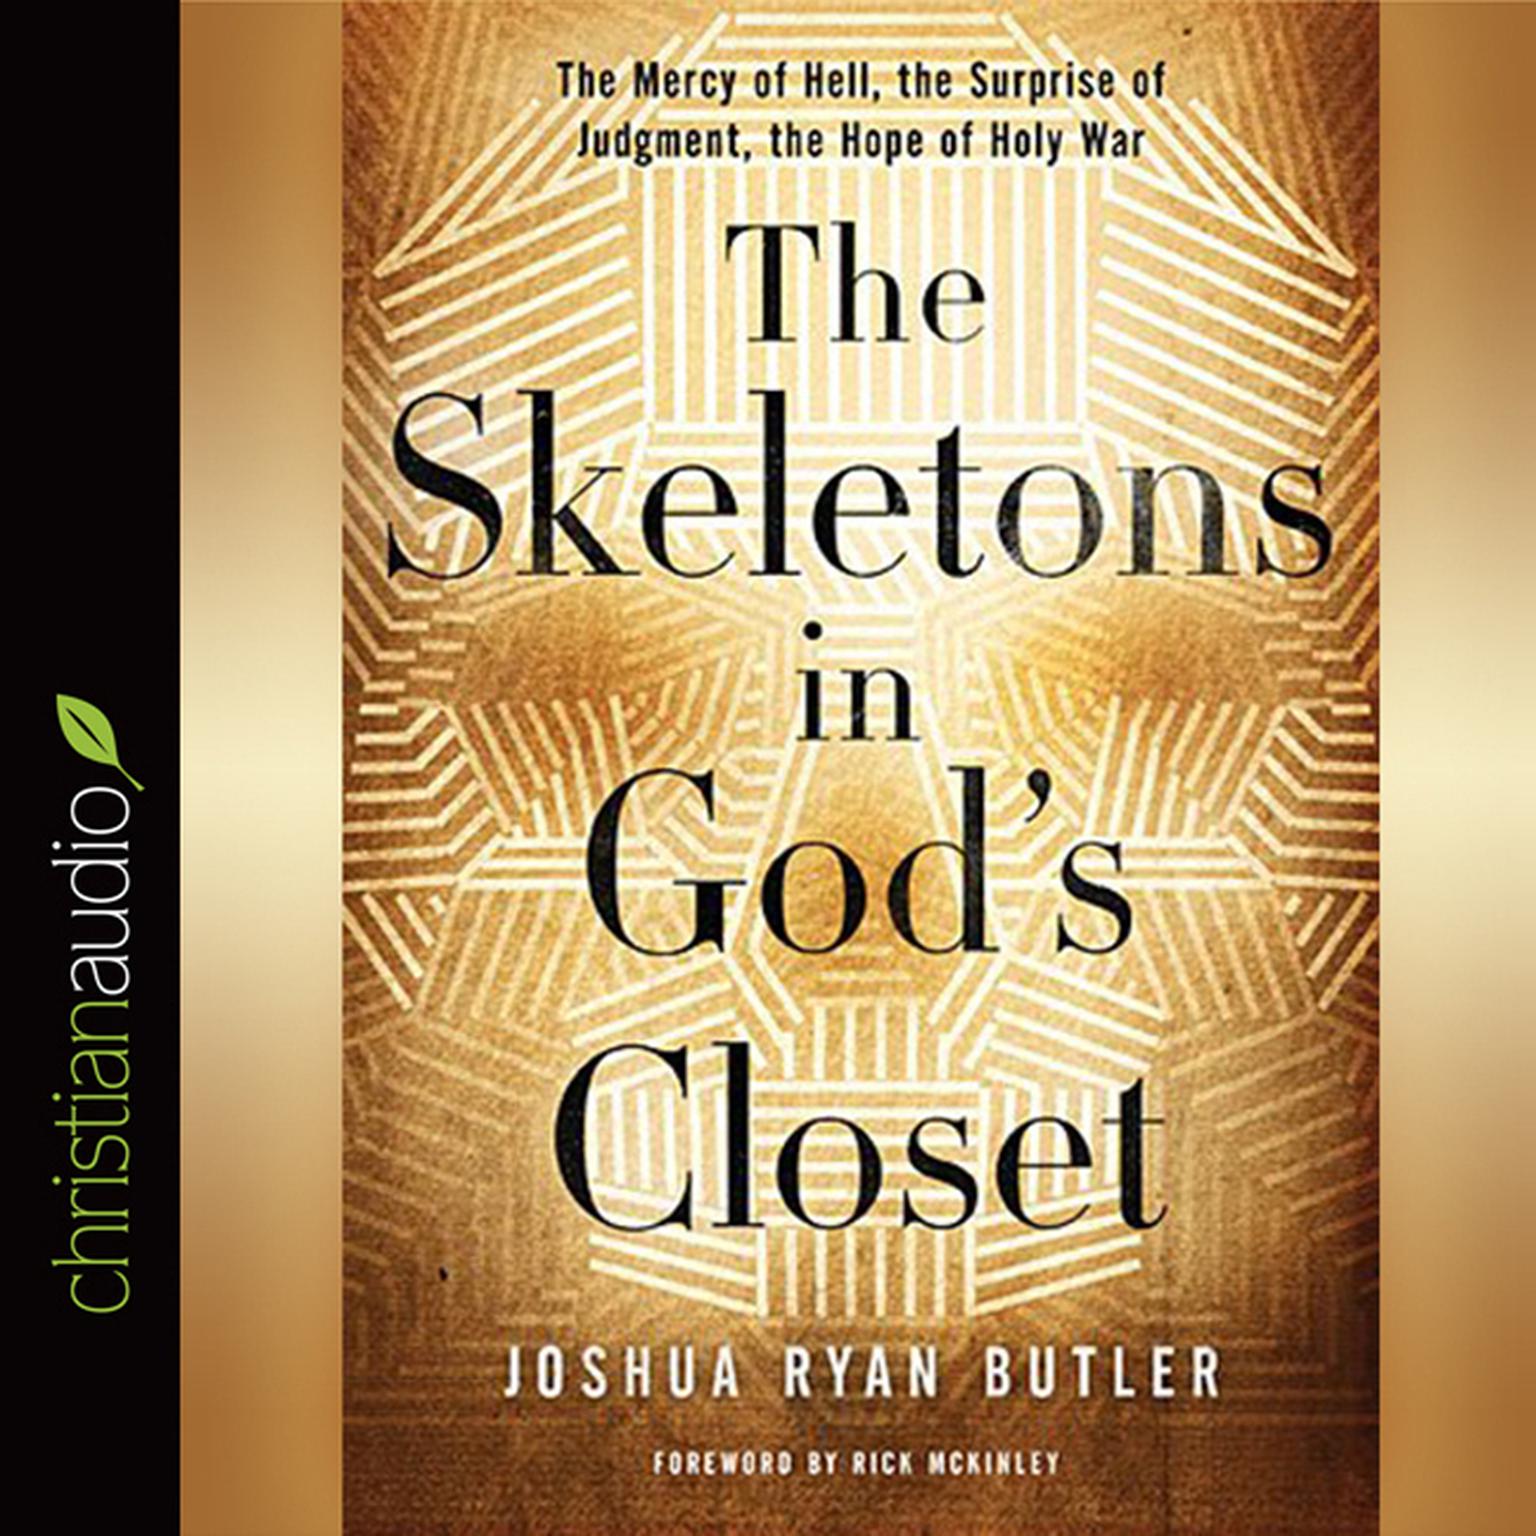 Skeletons in Gods Closet: The Mercy of Hell, the Surprise of Judgment, the Hope of Holy War Audiobook, by Joshua Ryan Butler